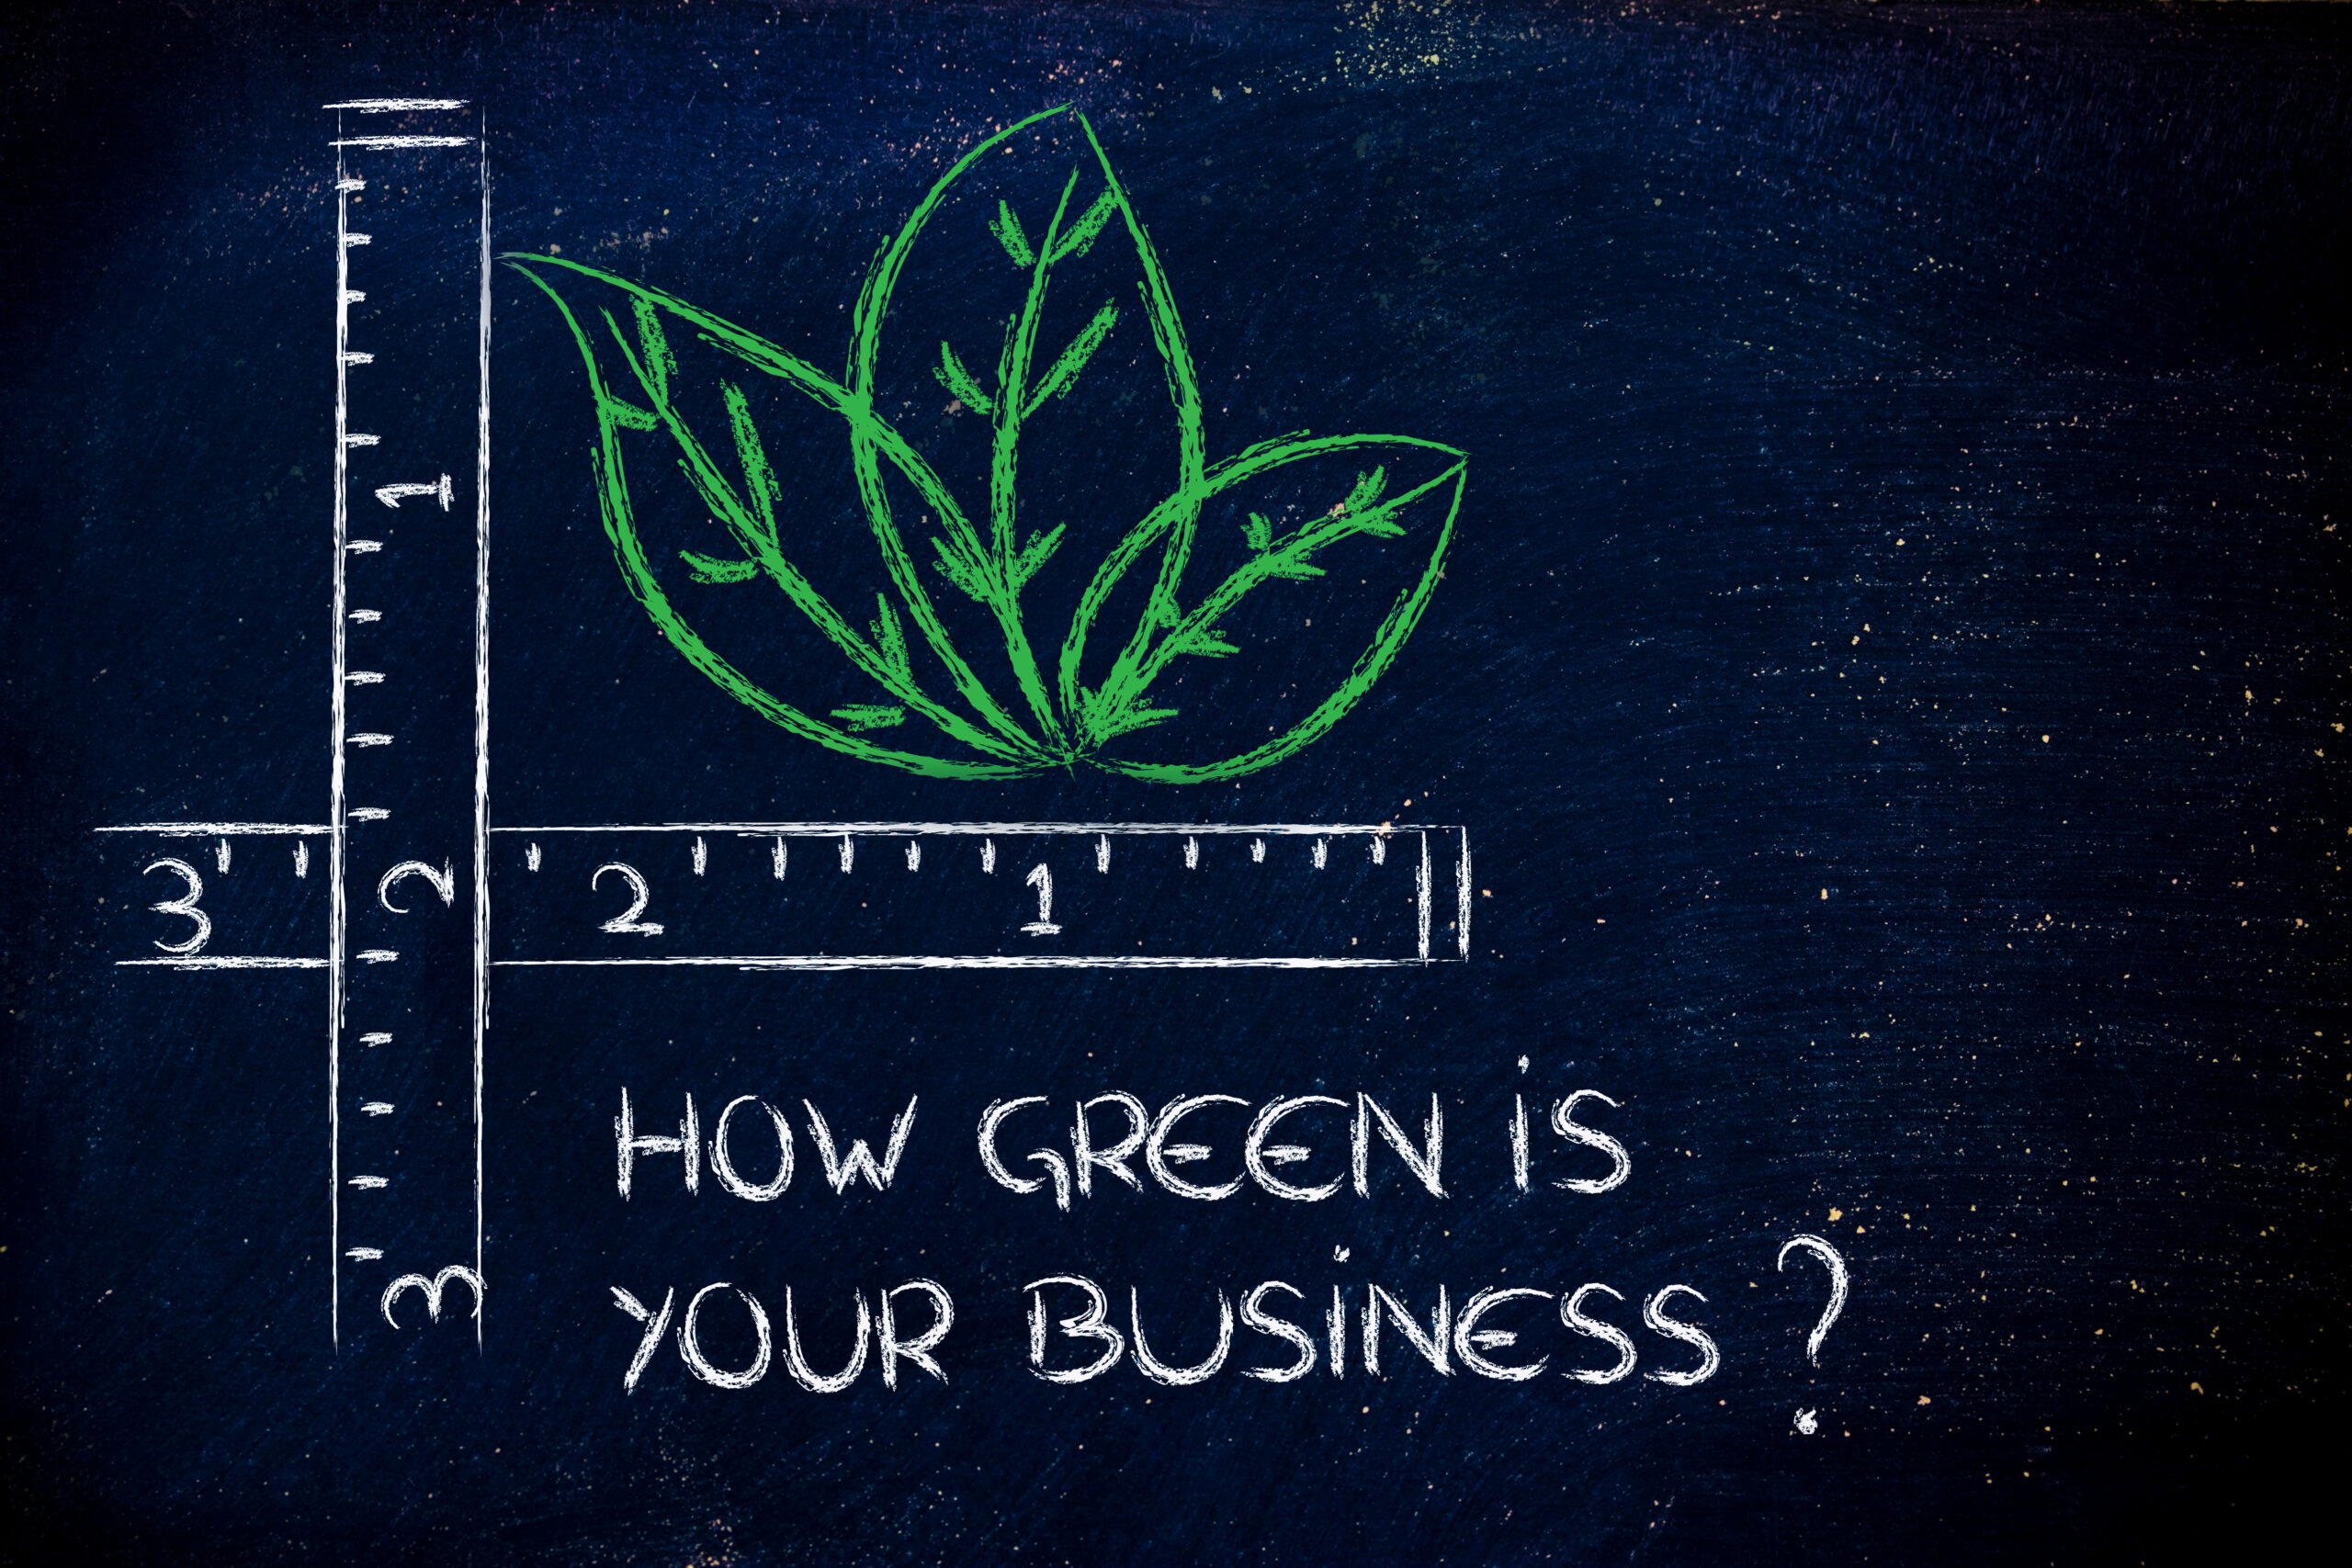 how green is your business?